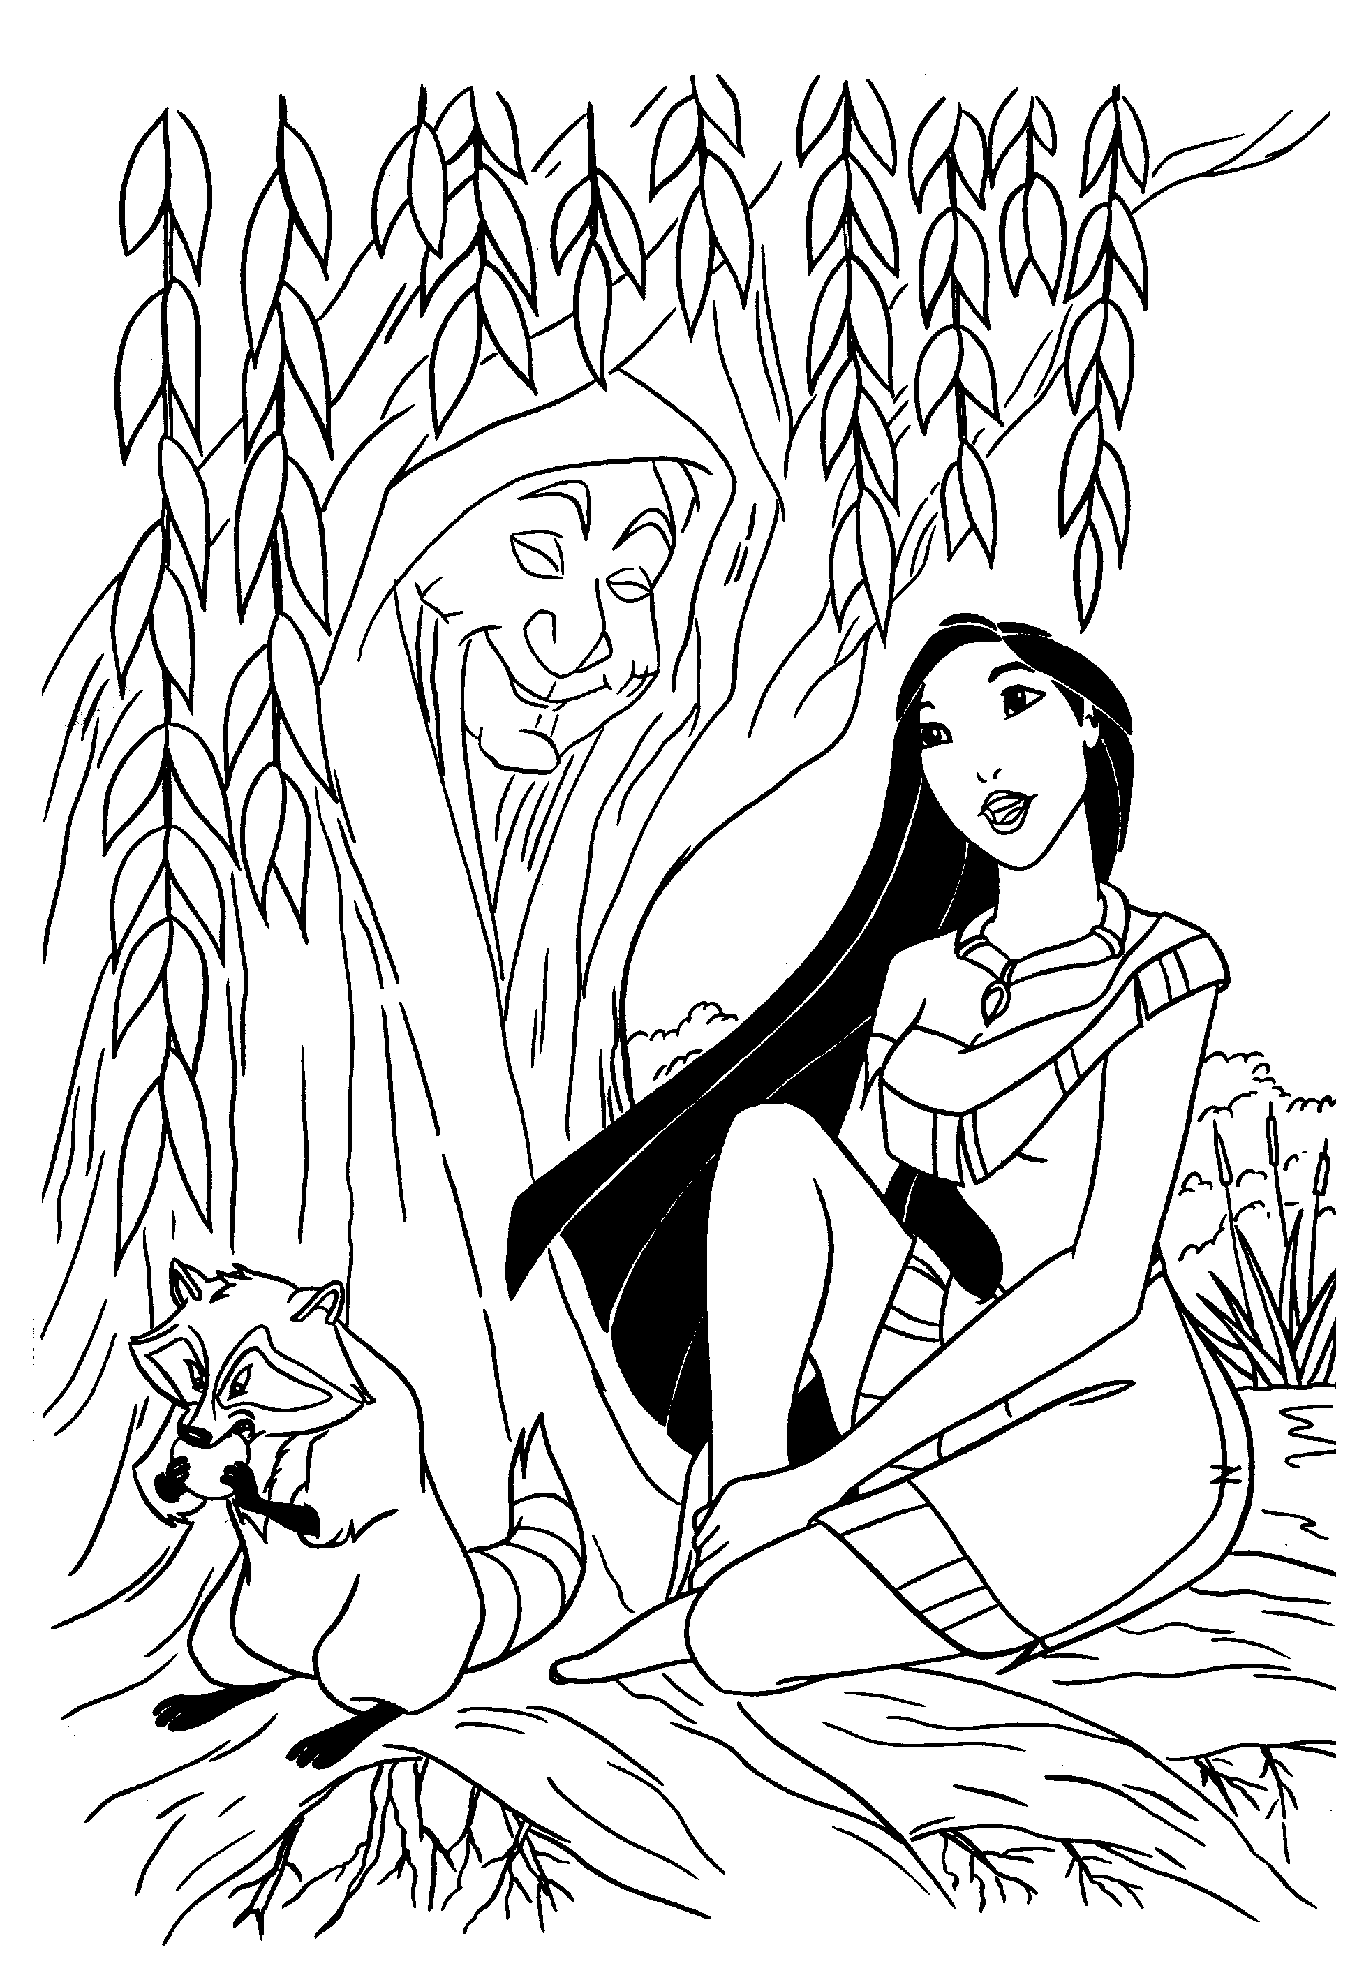 Color this beautiful Pocahontas coloring page with your favorite colors